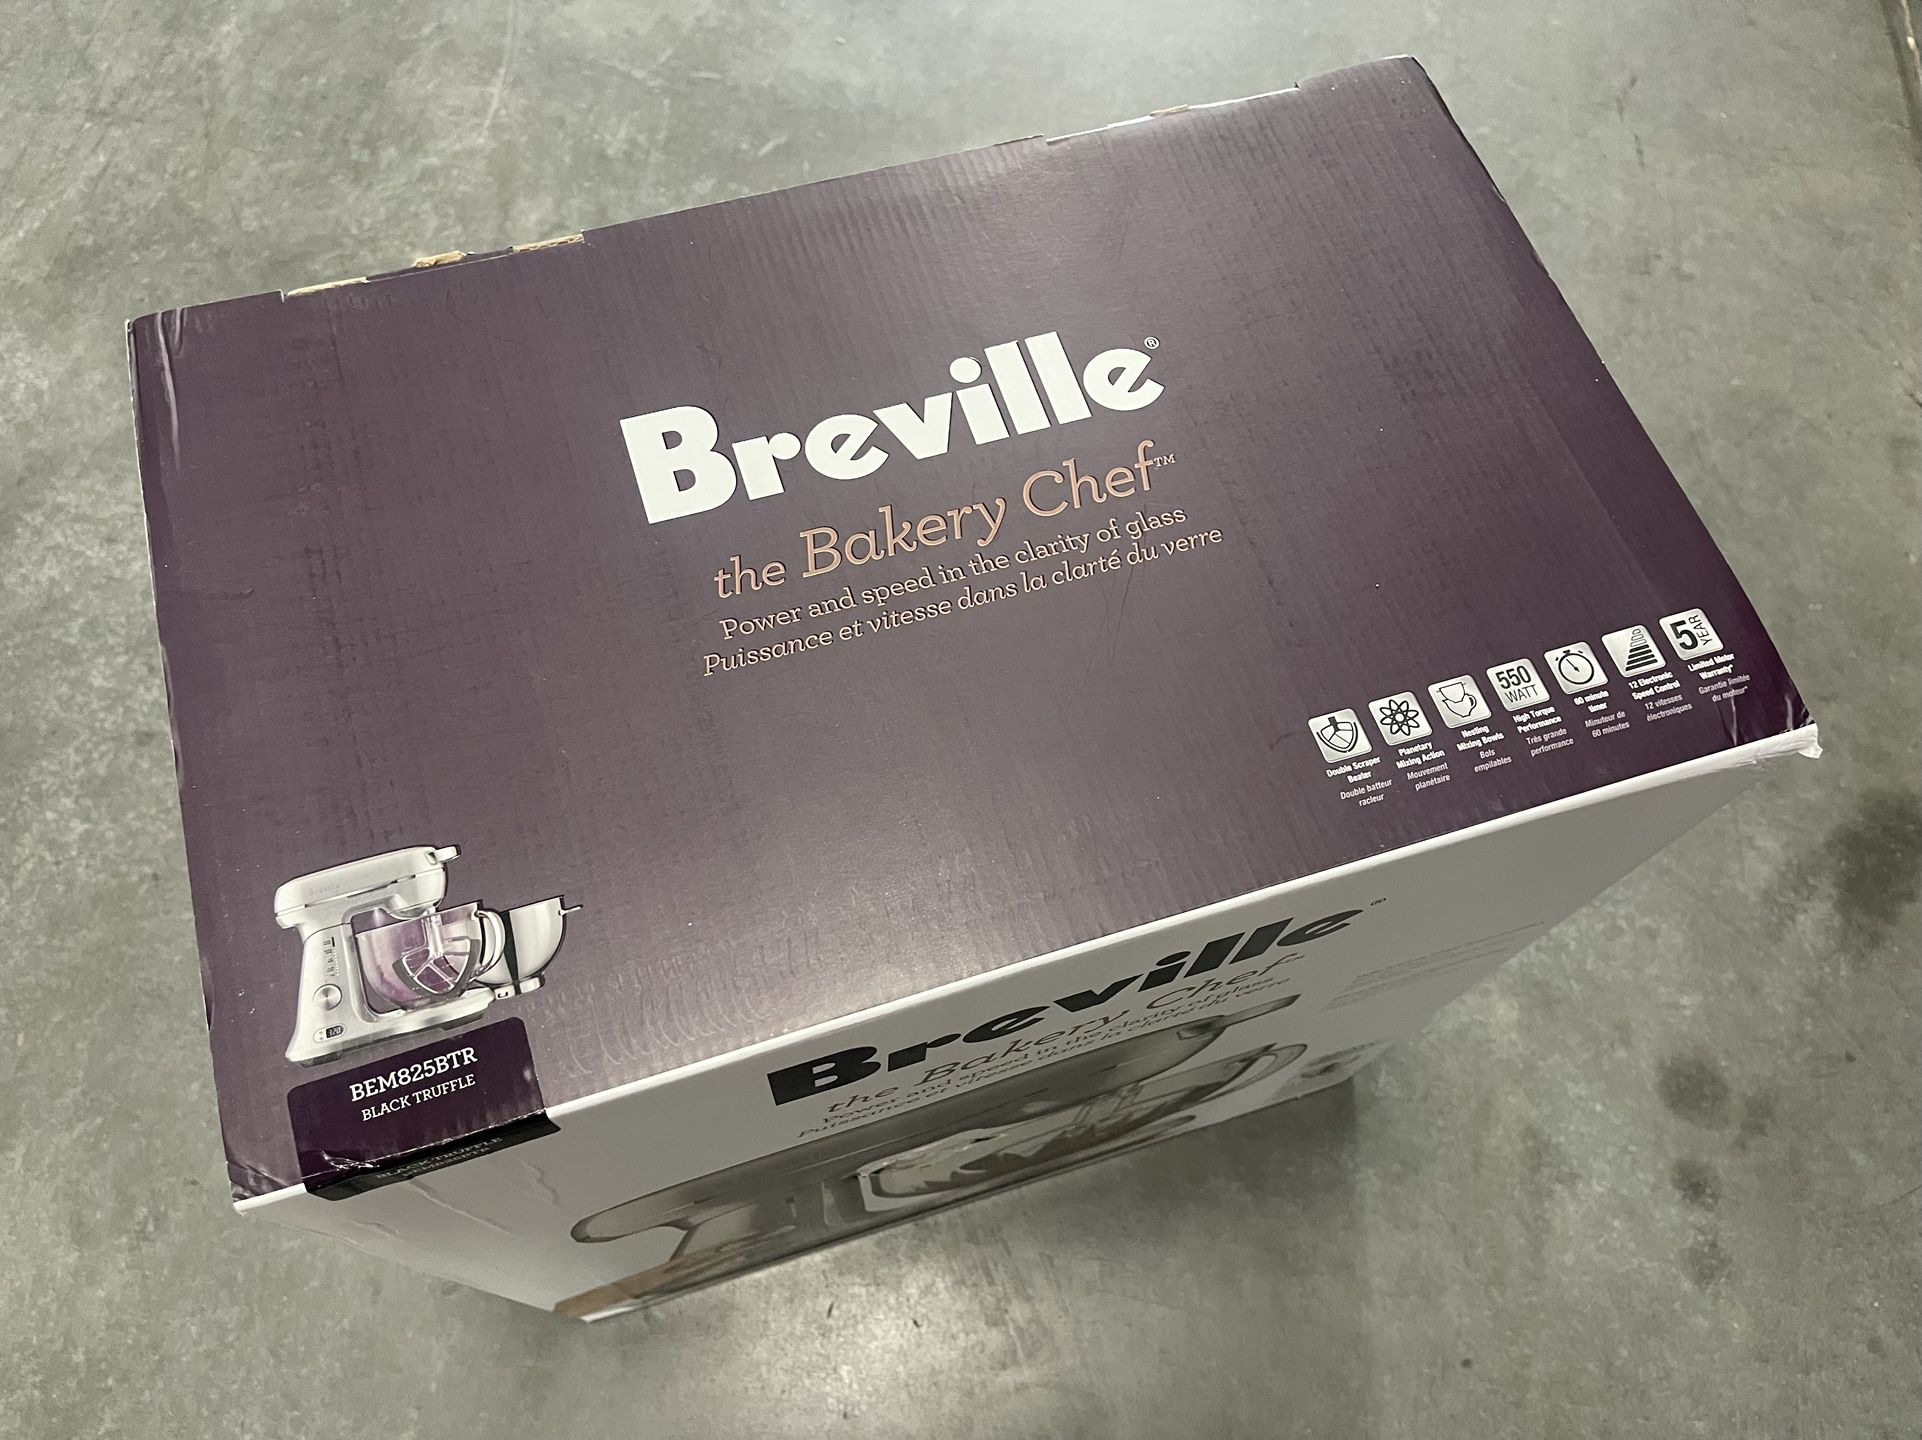 NEW Breville BEM825BAL the Bakery Chef Mixer RARE 'BRUSHED METAL'  21614056962